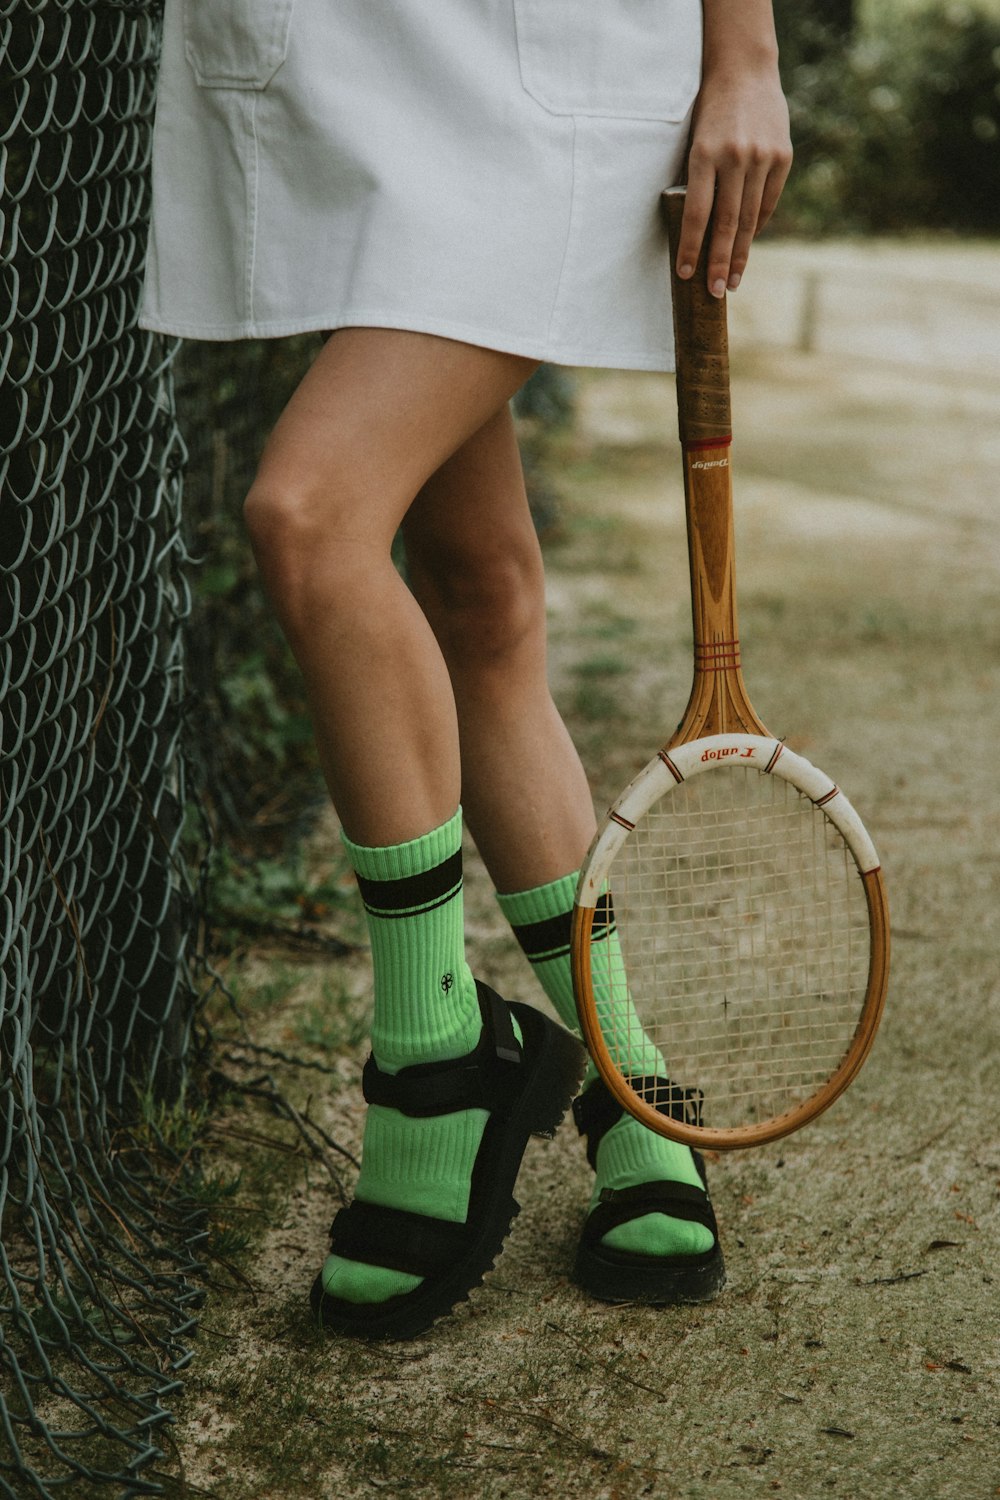 woman in white skirt and green socks holding brown and white tennis racket